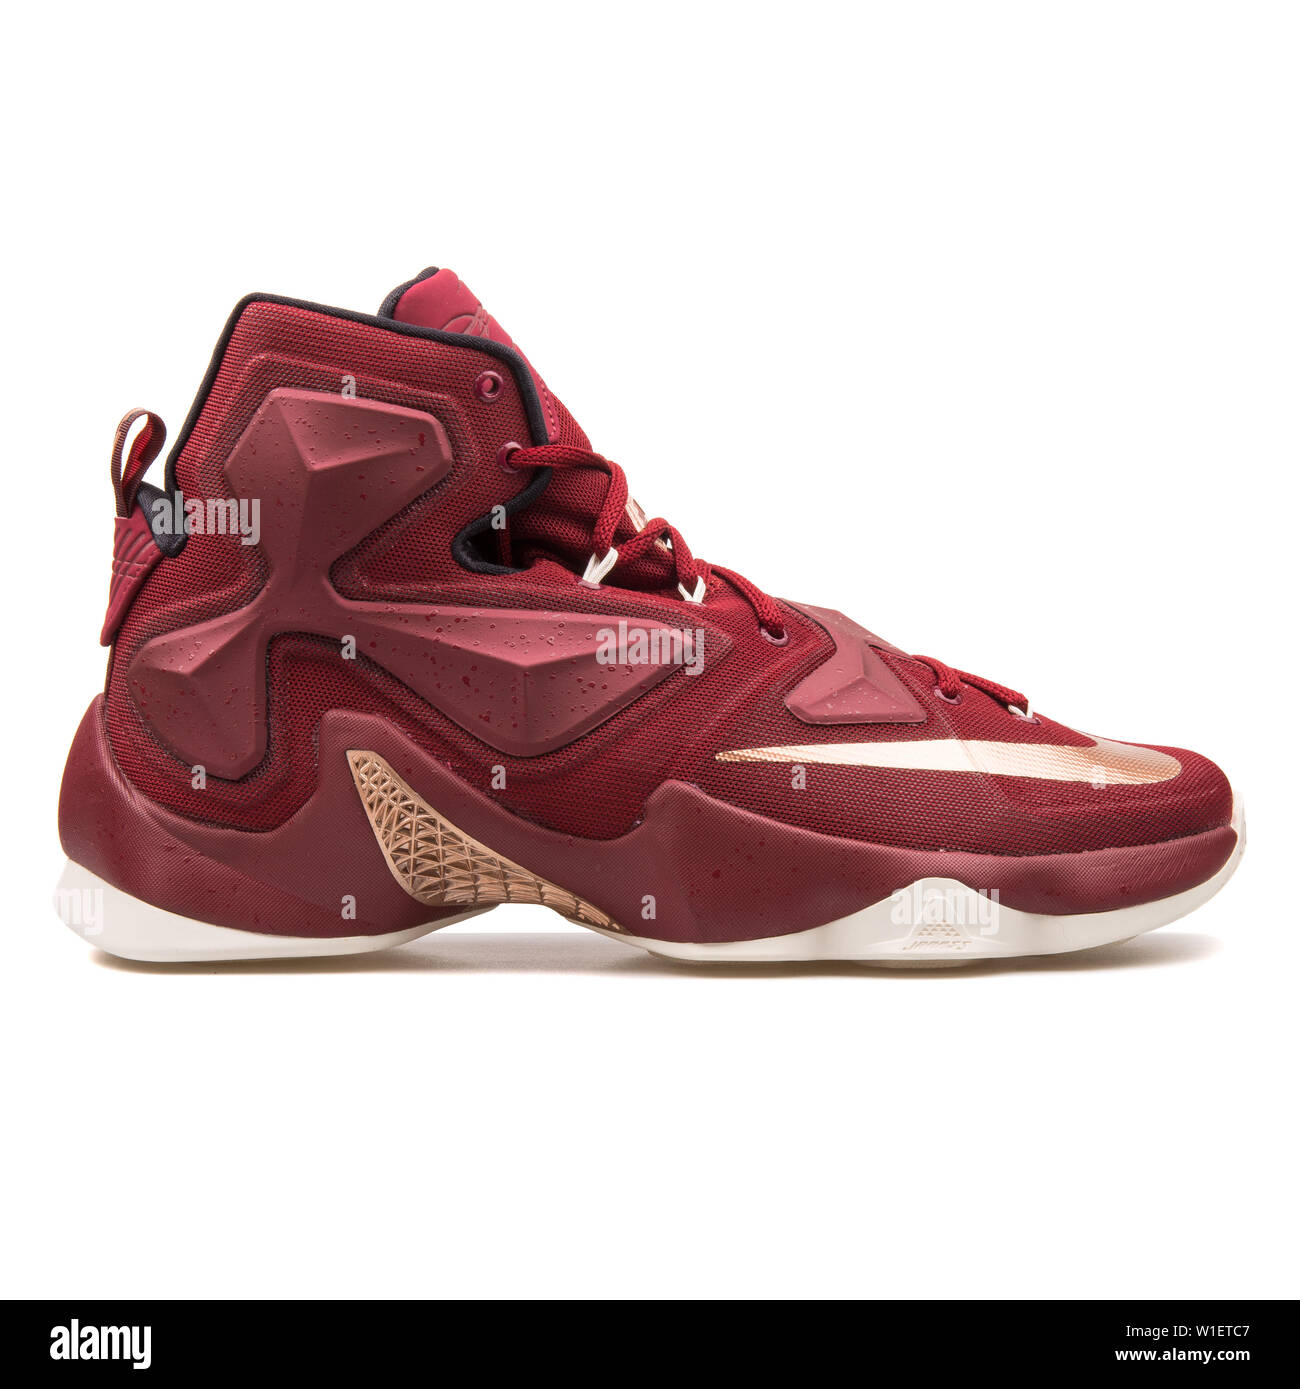 VIENNA, AUSTRIA - AUGUST 10, 2017: Nike Lebron XIII team red and bronze  sneaker on white background Stock Photo - Alamy